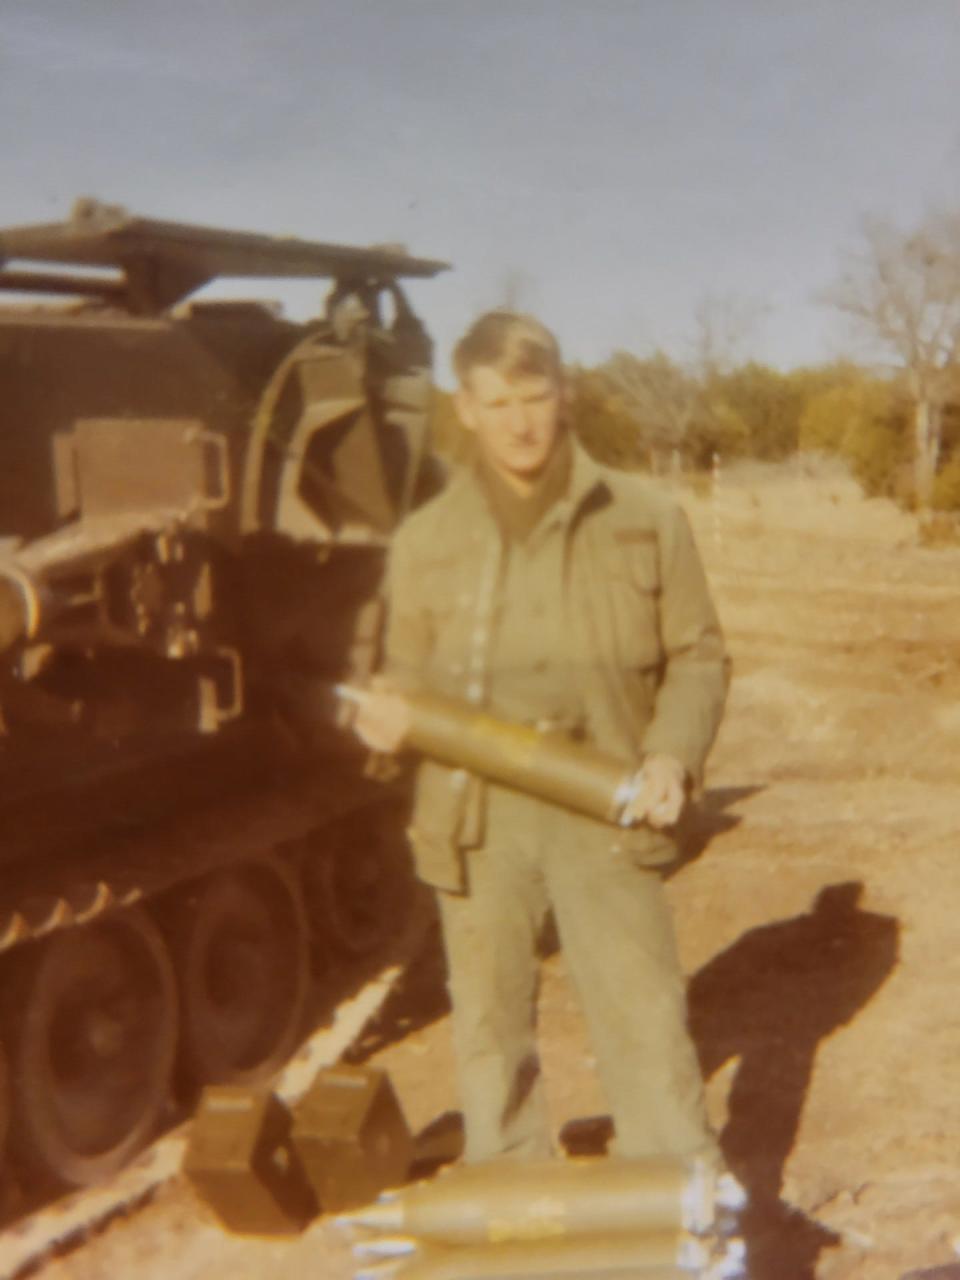 Robert Zoller was a machine gunner with the Army's 101st Airborne Division in Vietnam.